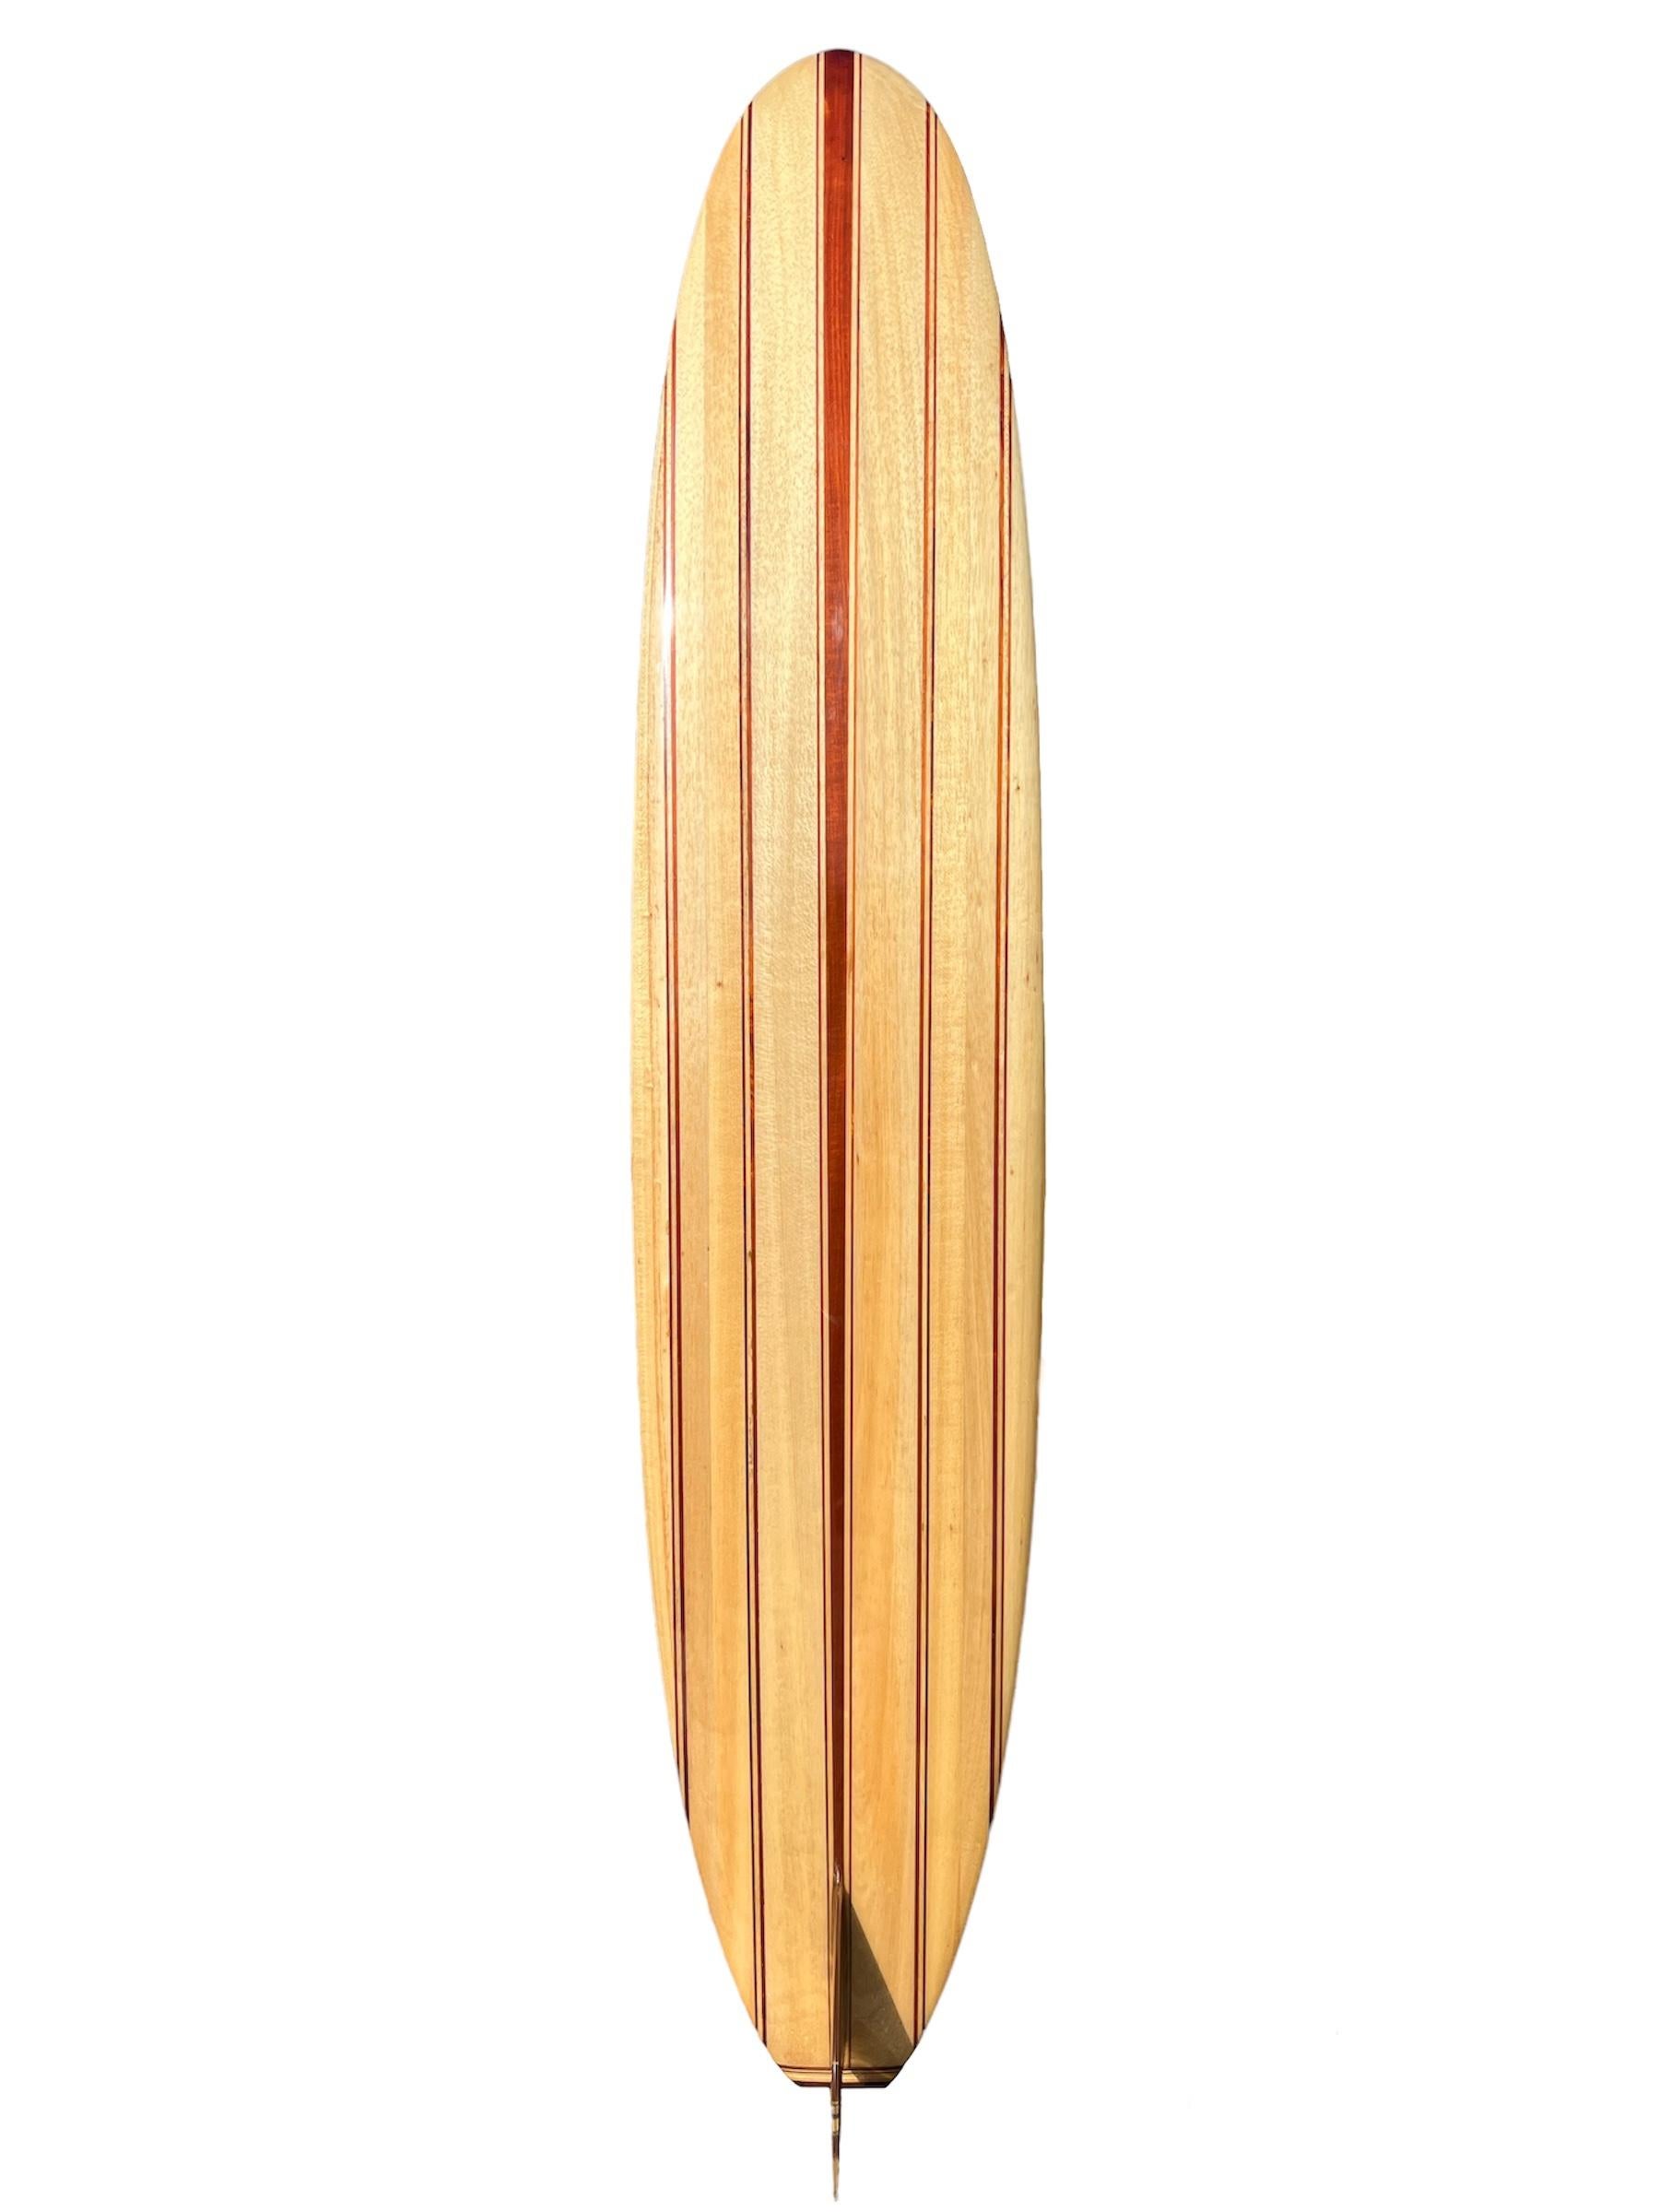 Mid-1990s Velzy balsawood longboard shaped by the late Dale Velzy (1927-2005). Features an incredible 11-stringer design with a stunning 29 piece wooden fin and complimentary 7 piece tail-block. The most intricate example of a vintage Dale Velzy